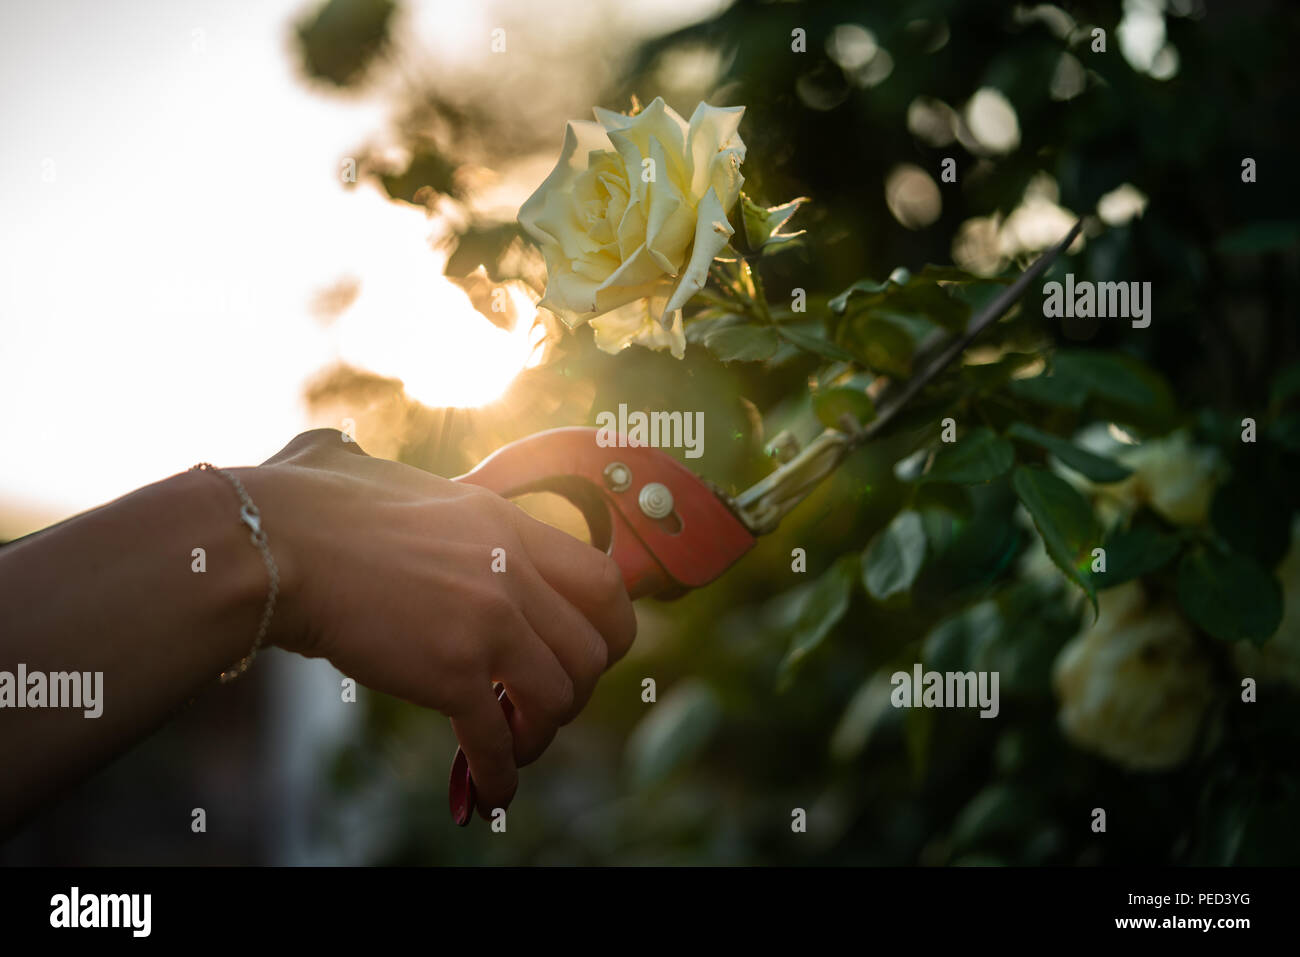 A wife cuts a rose with a red pruner. Stock Photo